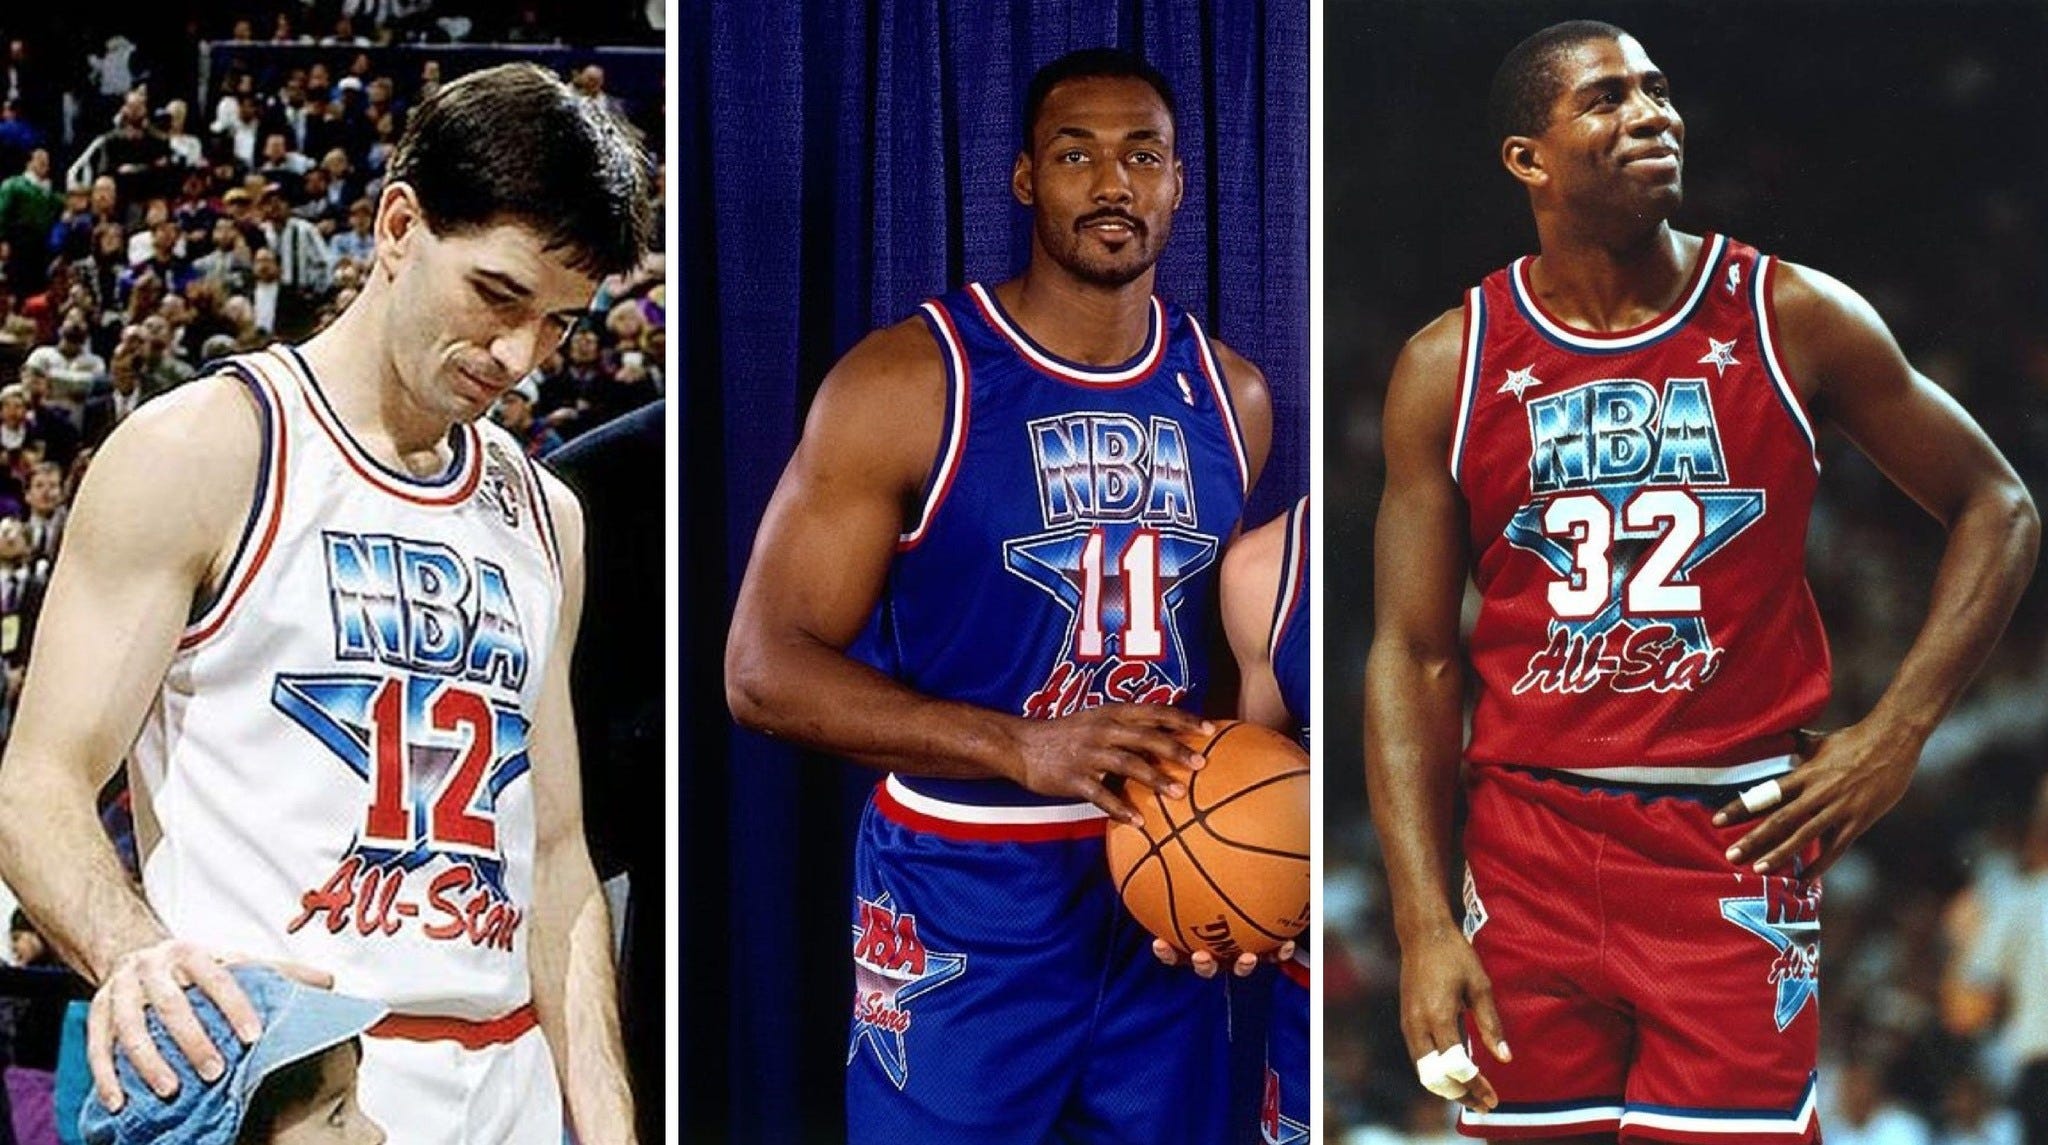 The best and worst of NBA All-Star unis through the years